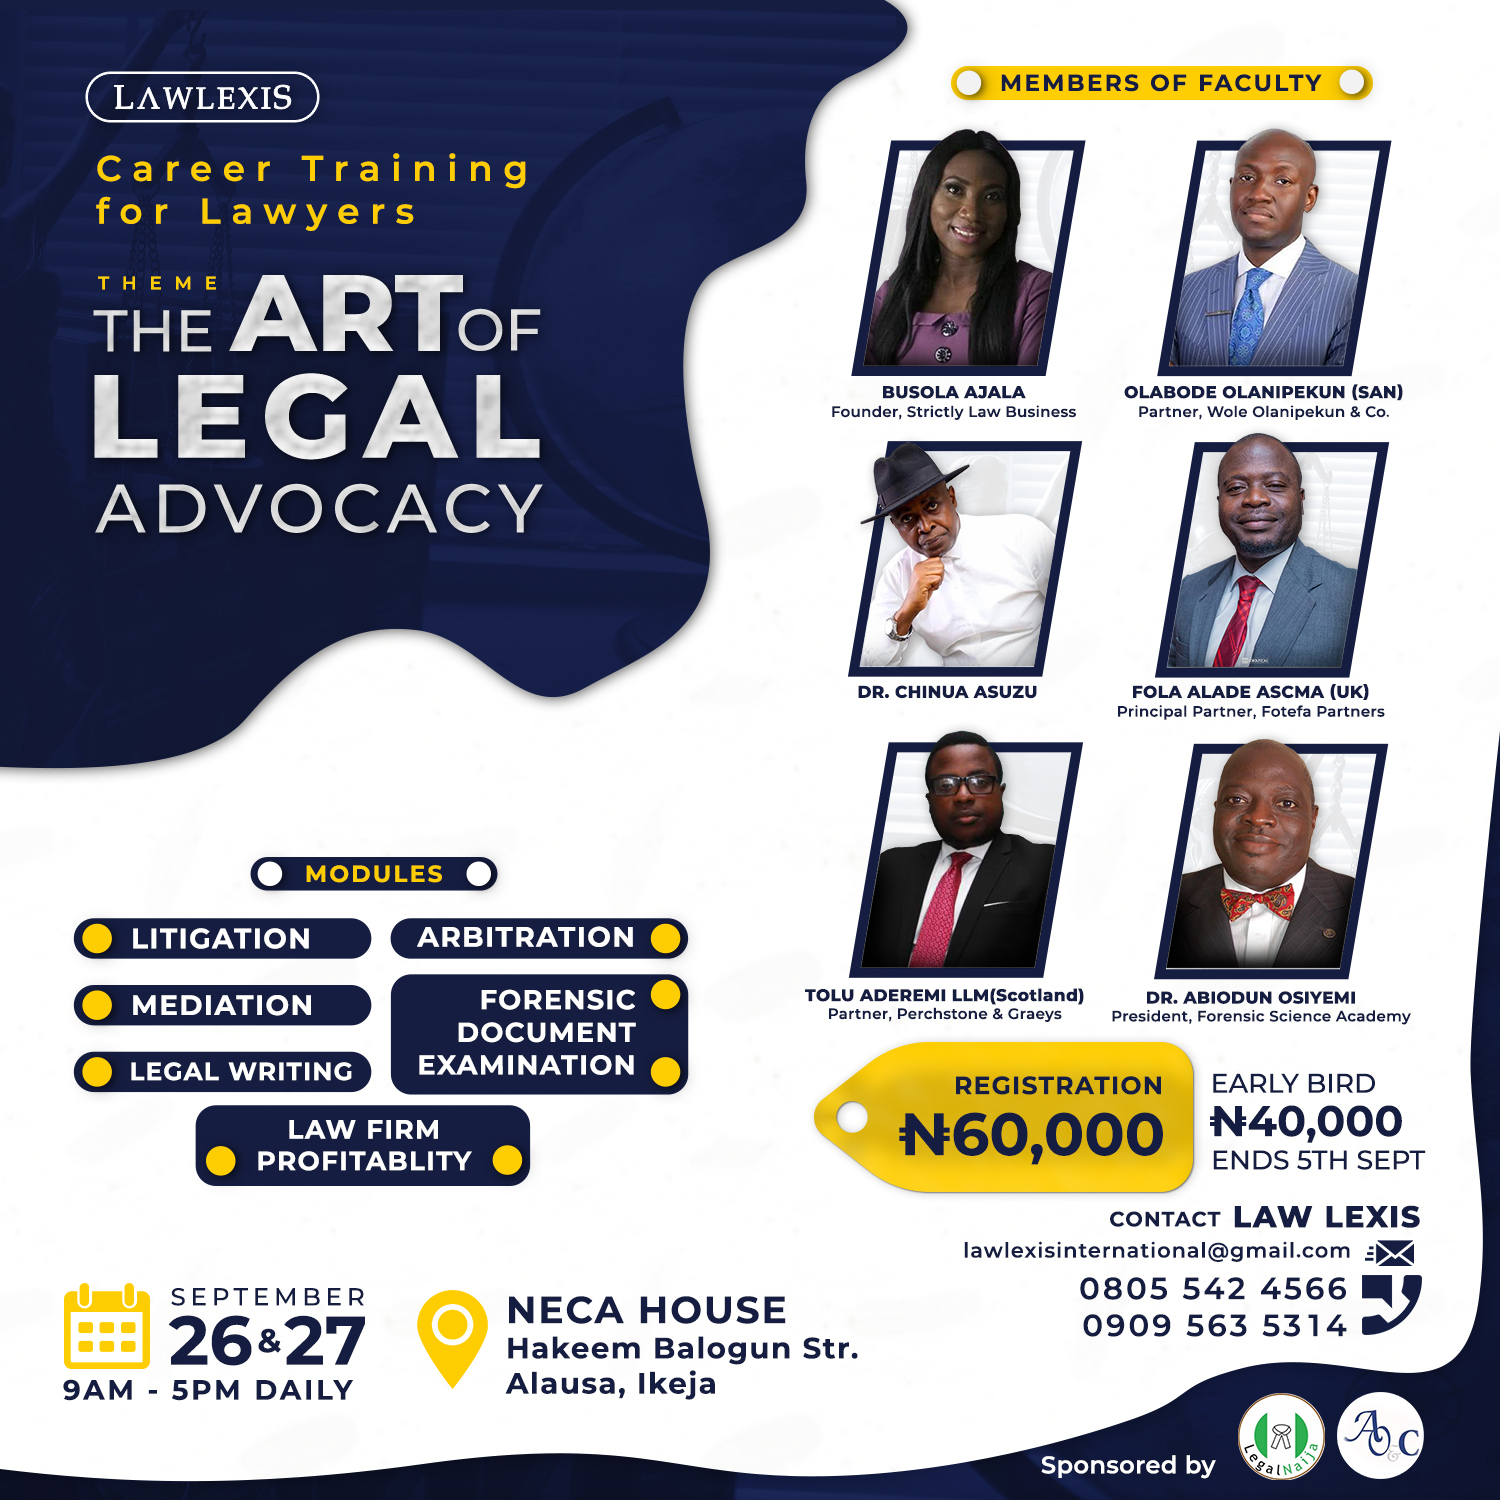 Register For Early Bird At The Career Training For Lawyers